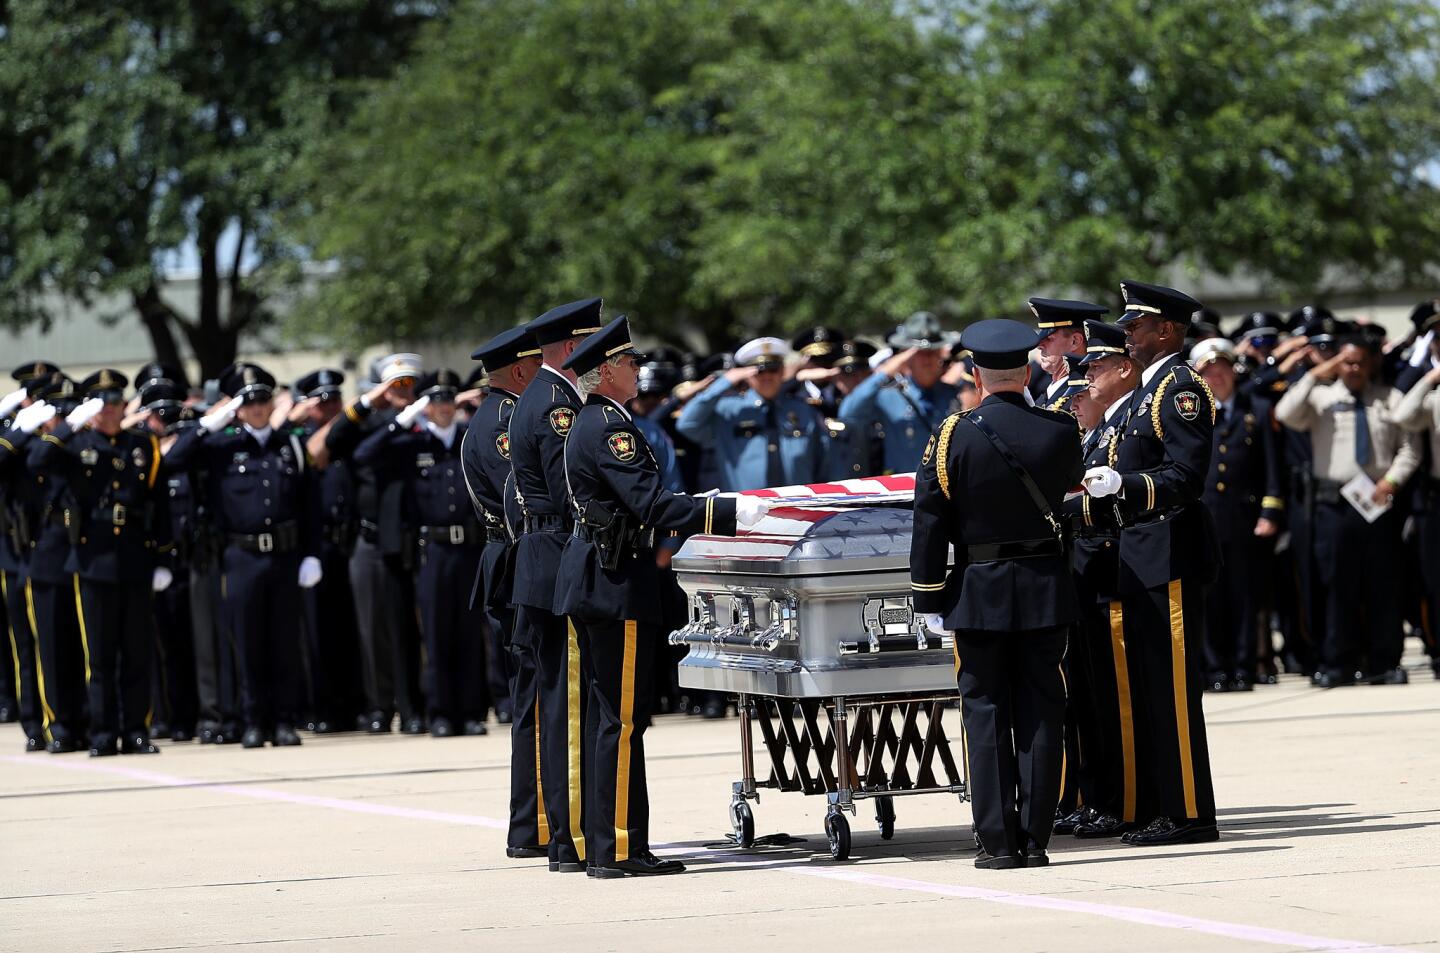 Dallas police officers remembered